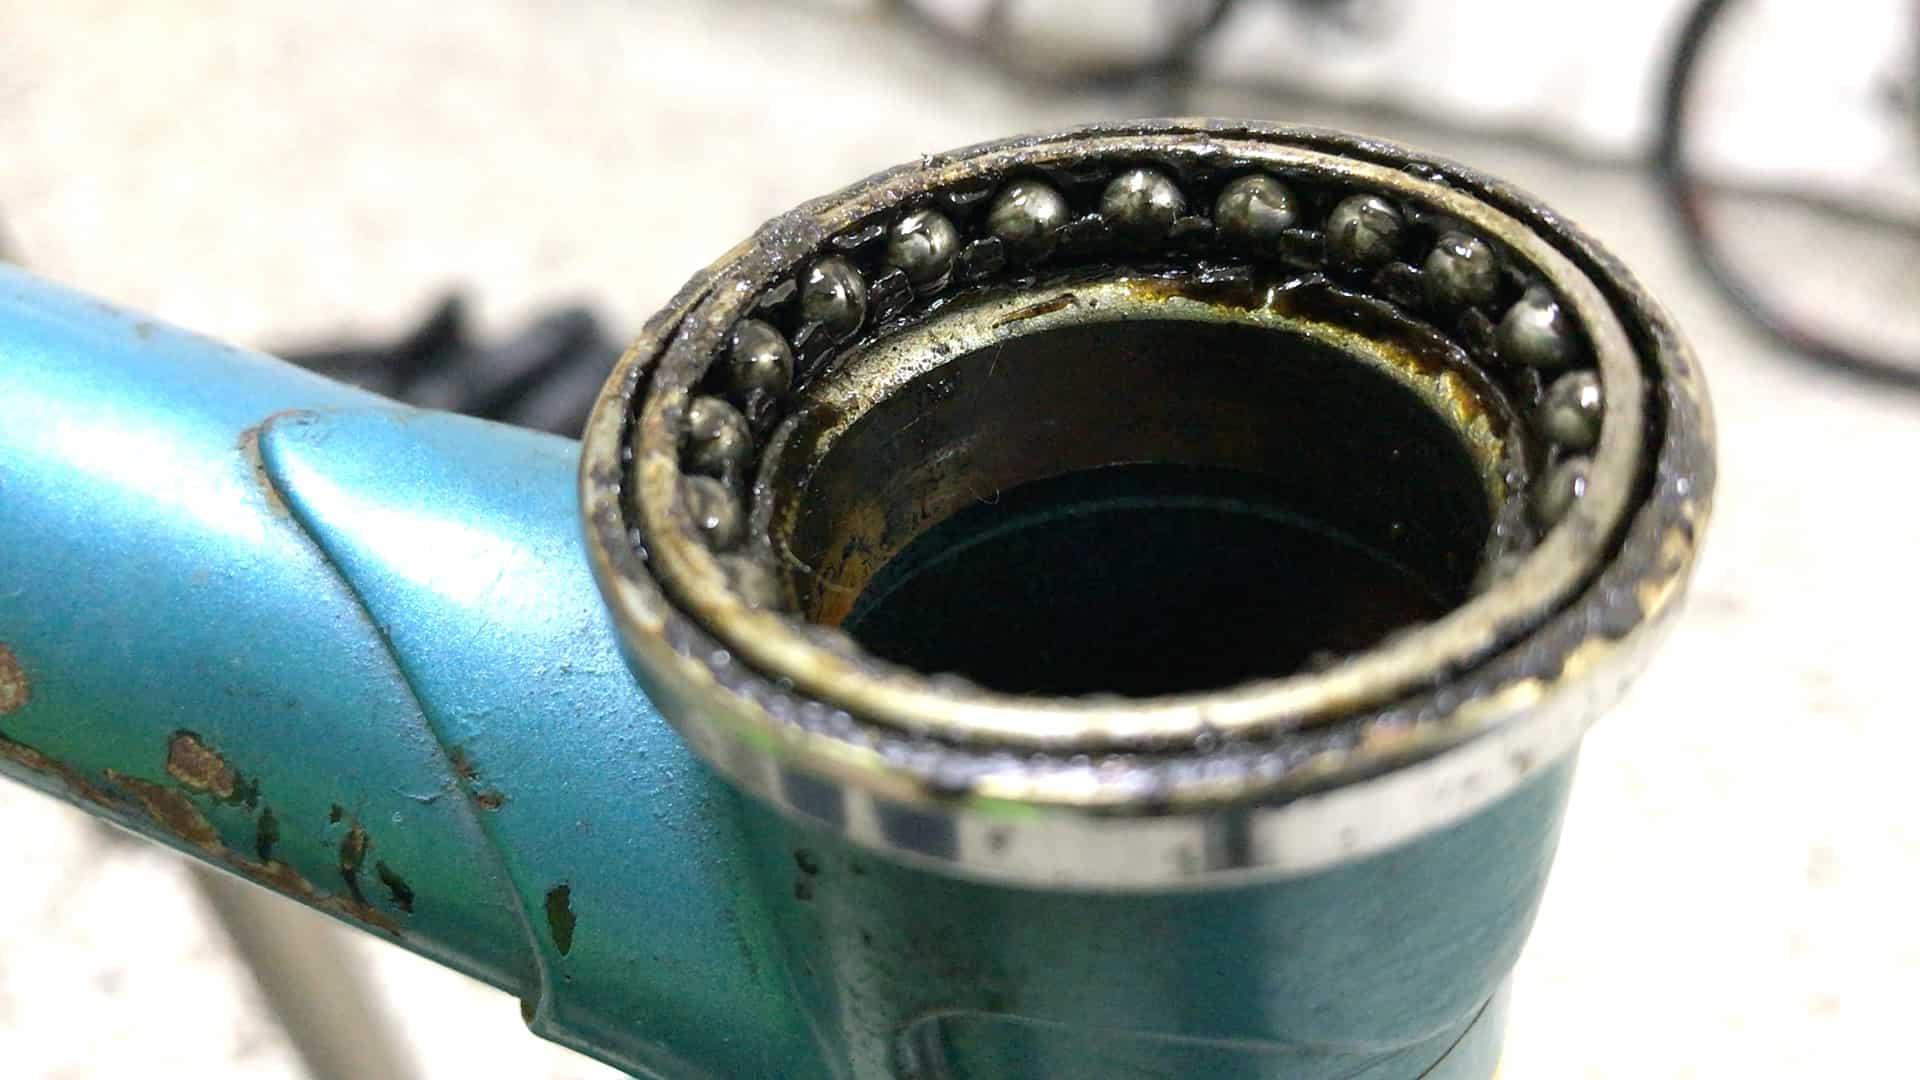 Caged bearings: keeping them clean significantly extends their life